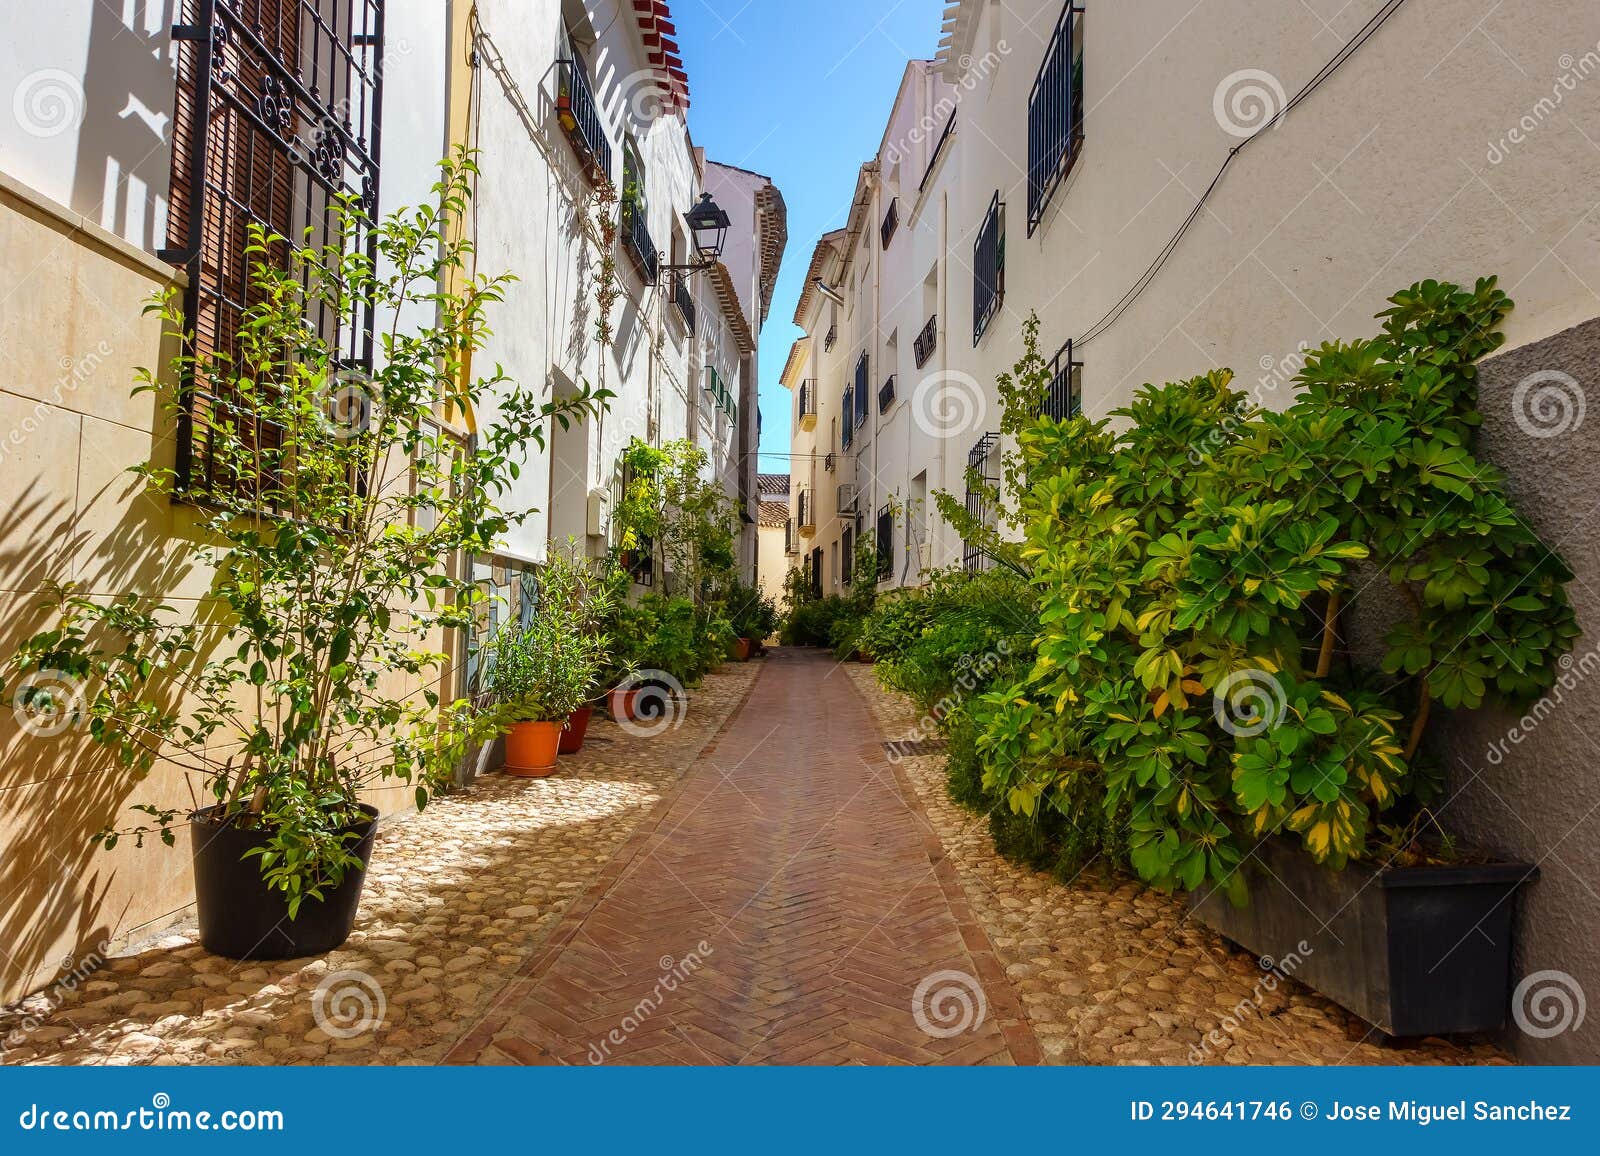 picturesque alley with whitewashed houses and potted plants all over the street, velez rubio, almeria.